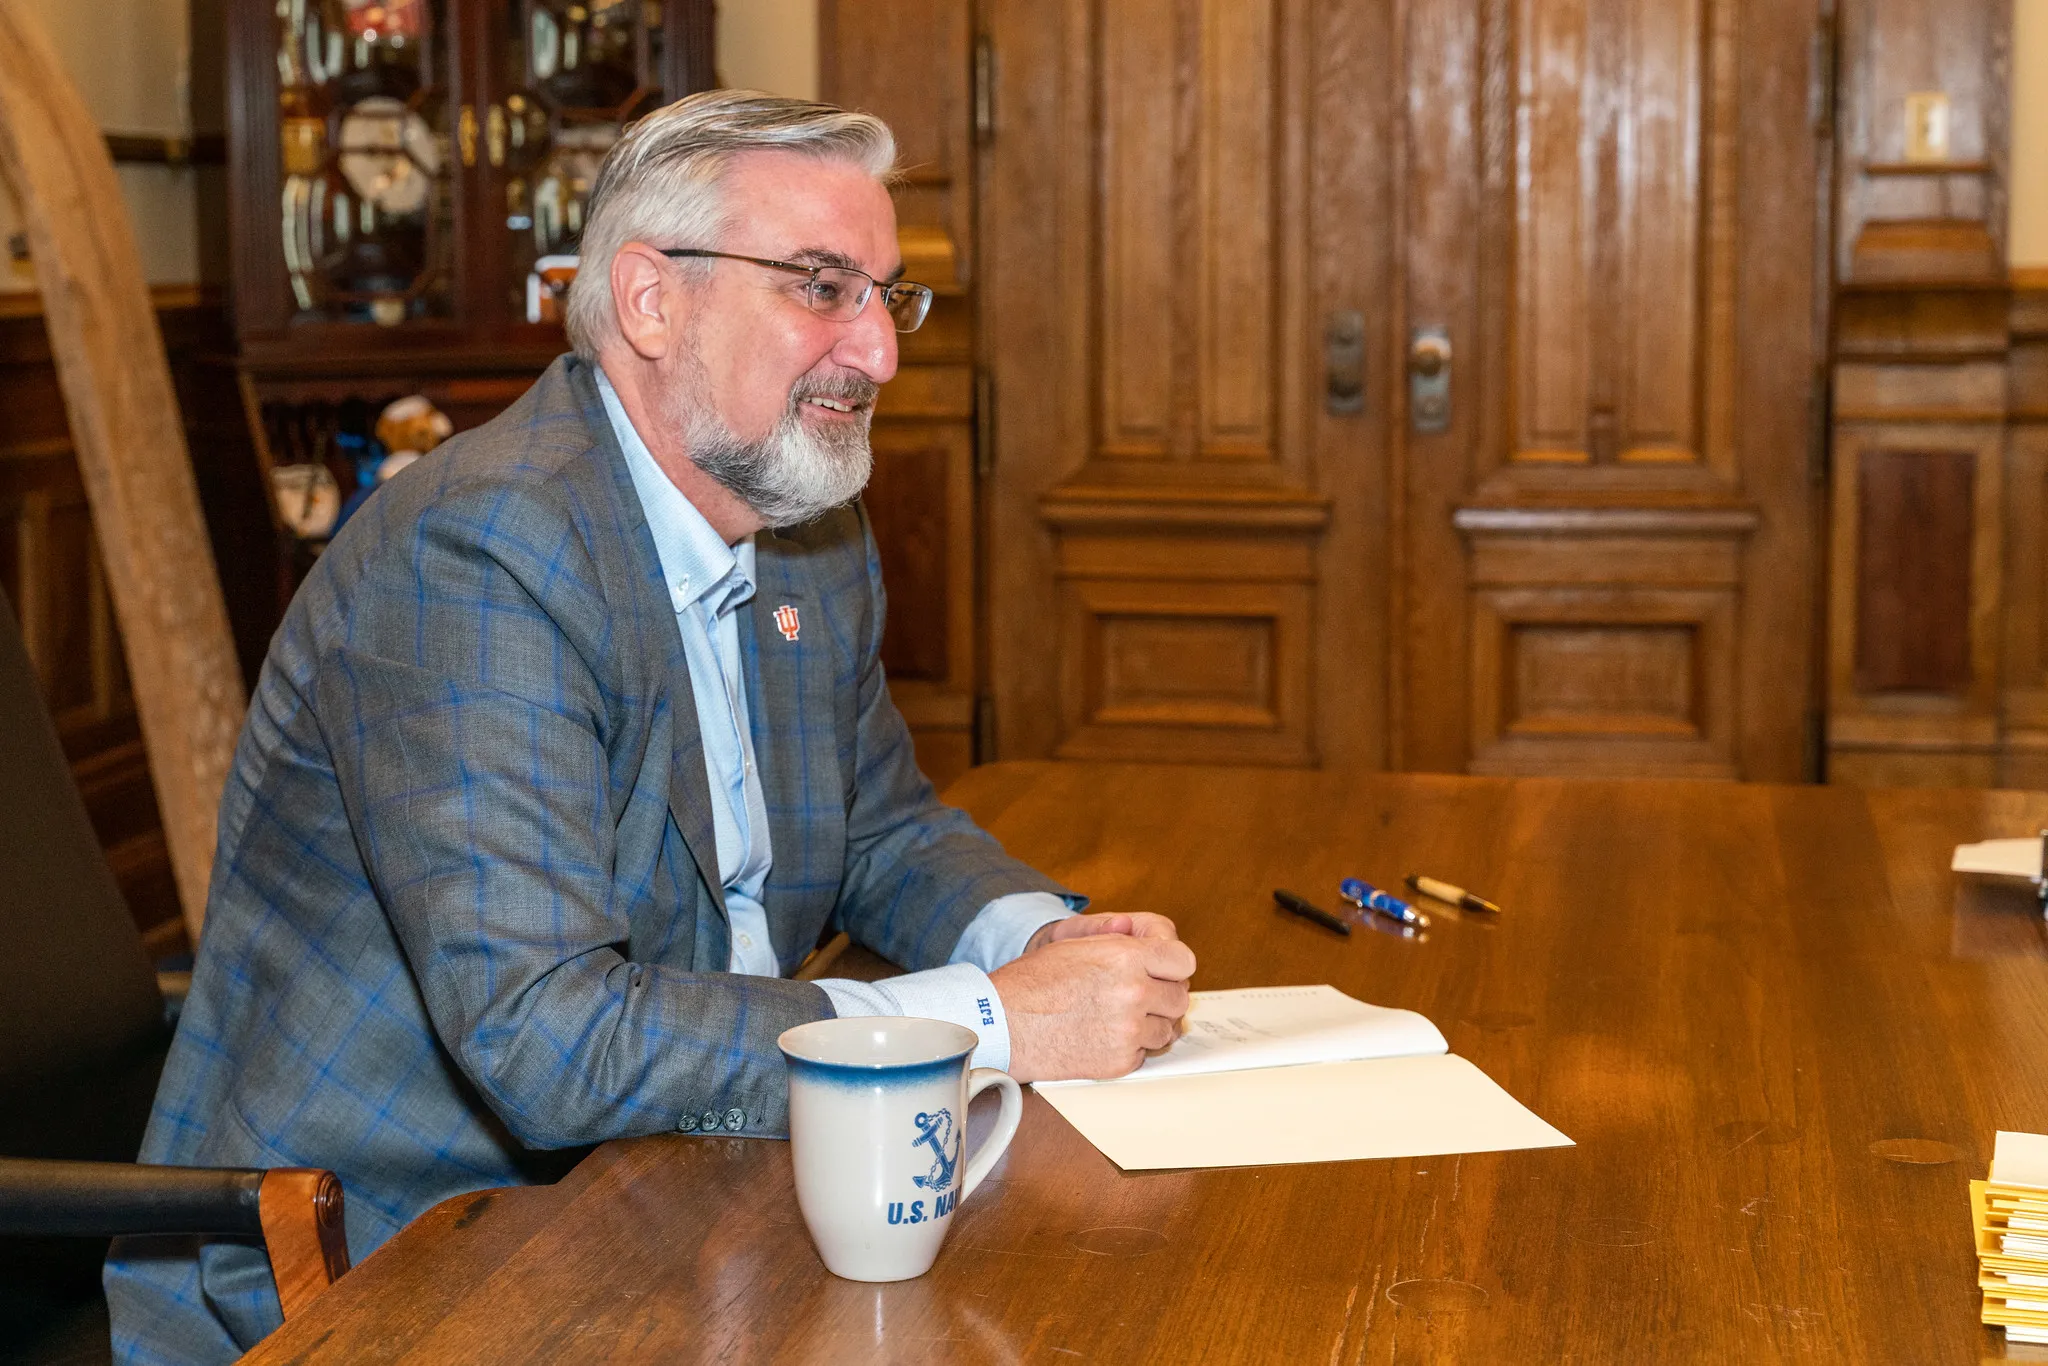 Indiana Governor Eric Holcomb signs bills in Indianapolis, March 10, 2022.?w=200&h=150